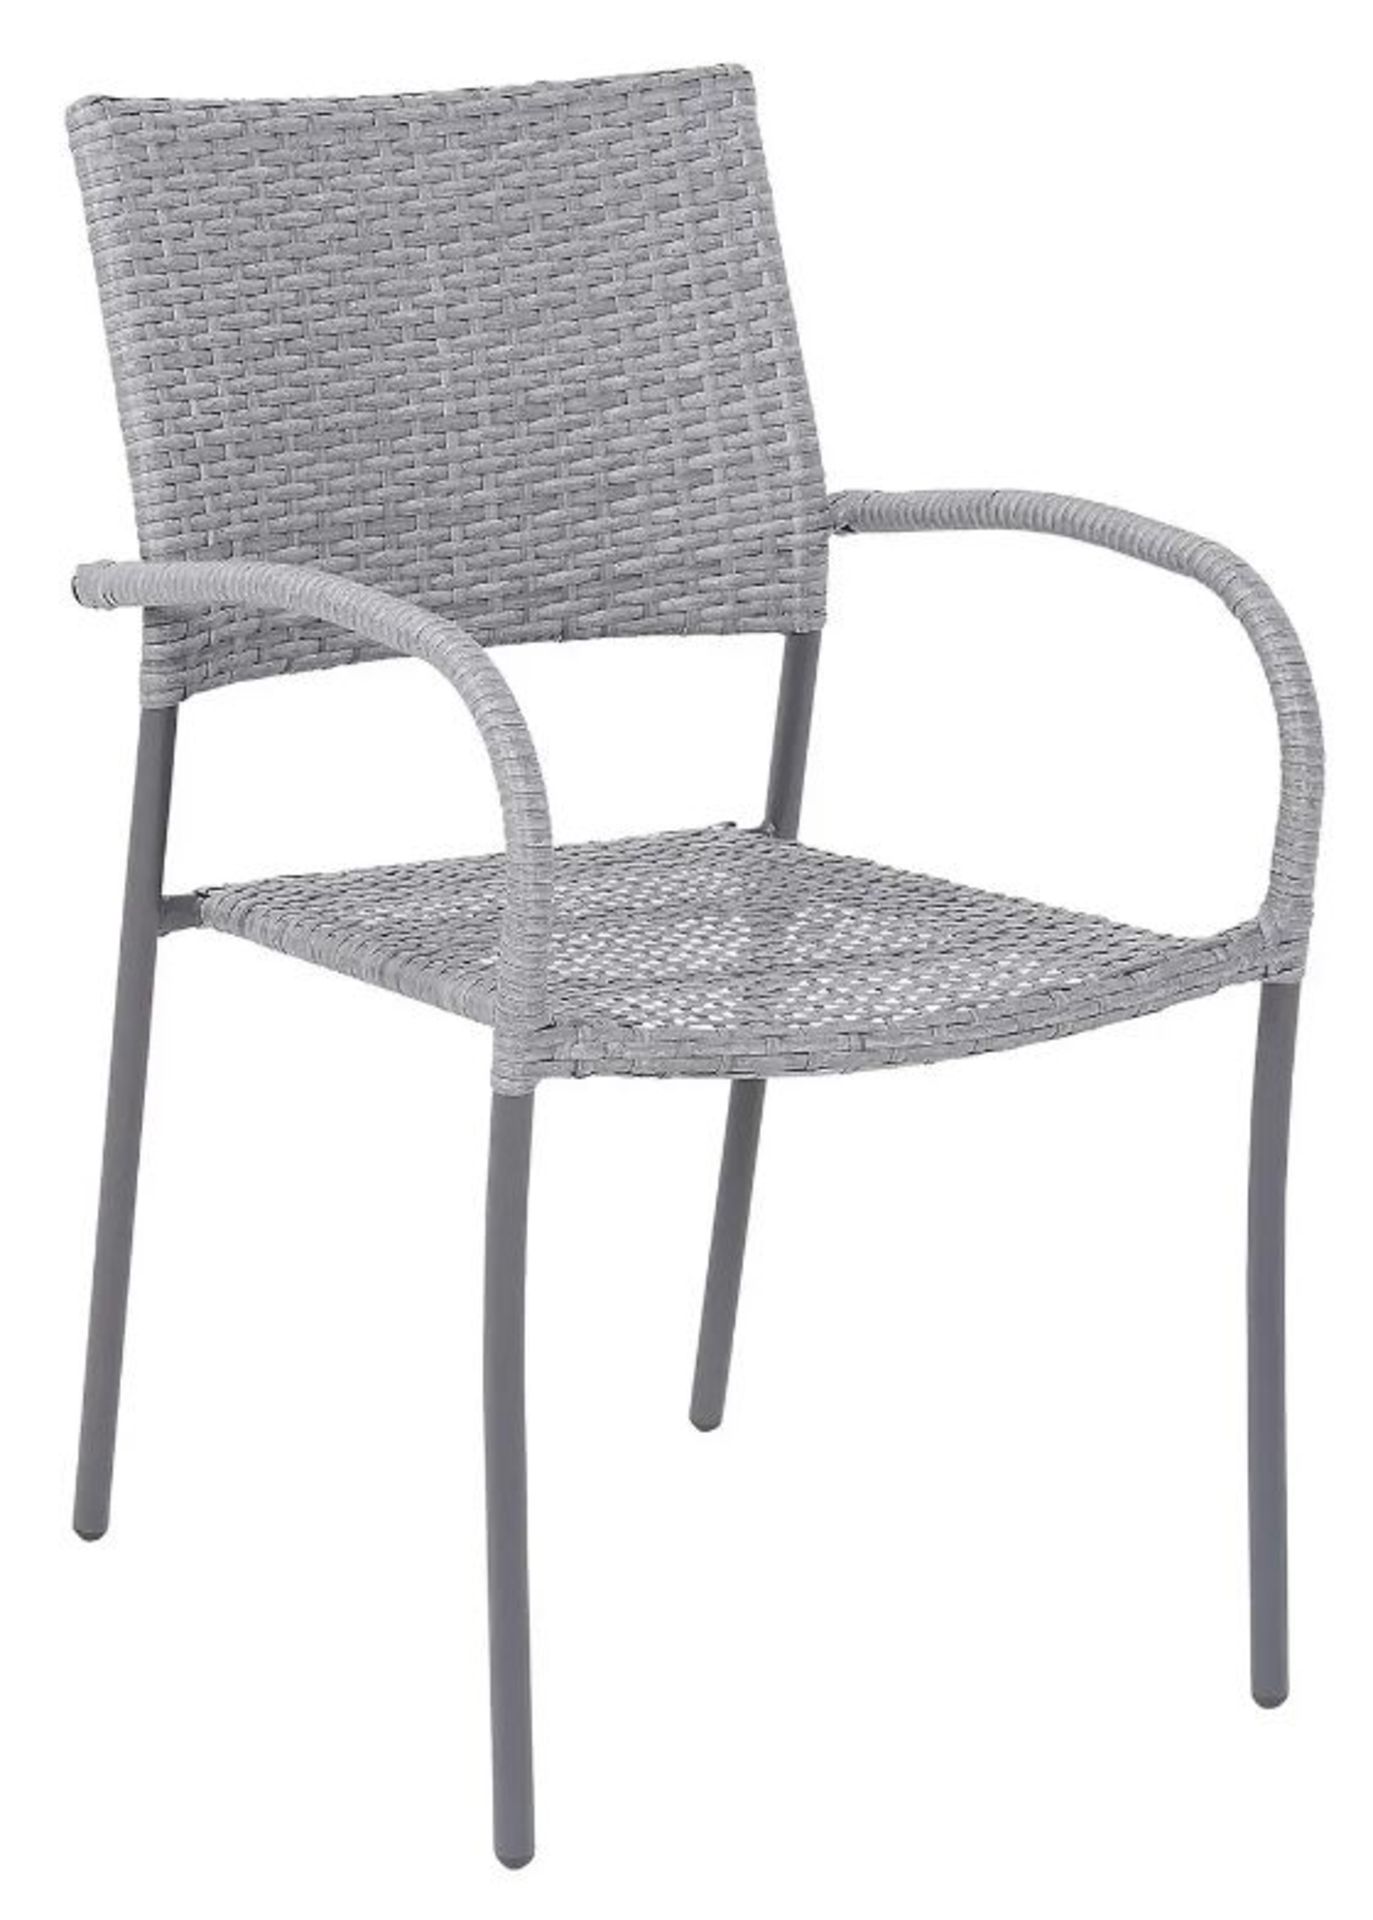 (1A) 4x Items. 3x Rattan Stackable Garden Chair. 1x Grey Faux Leather Chair. (All Items Appear Cle